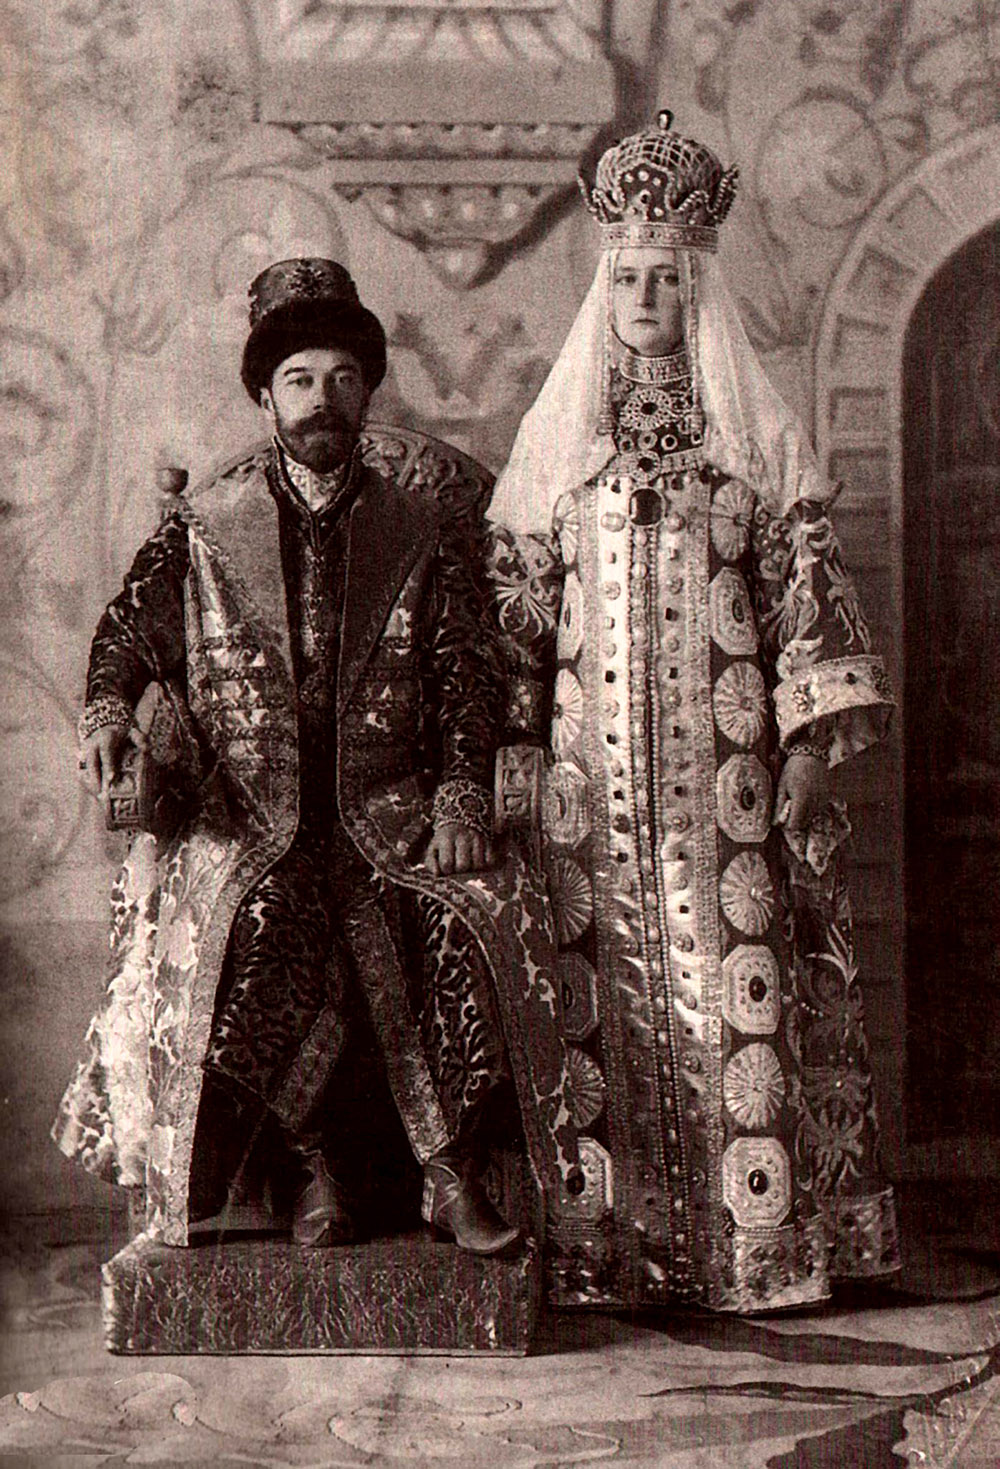 Nicholas II of Russia and Alexandra Fyodorovna dressed up for the 1903 Bal